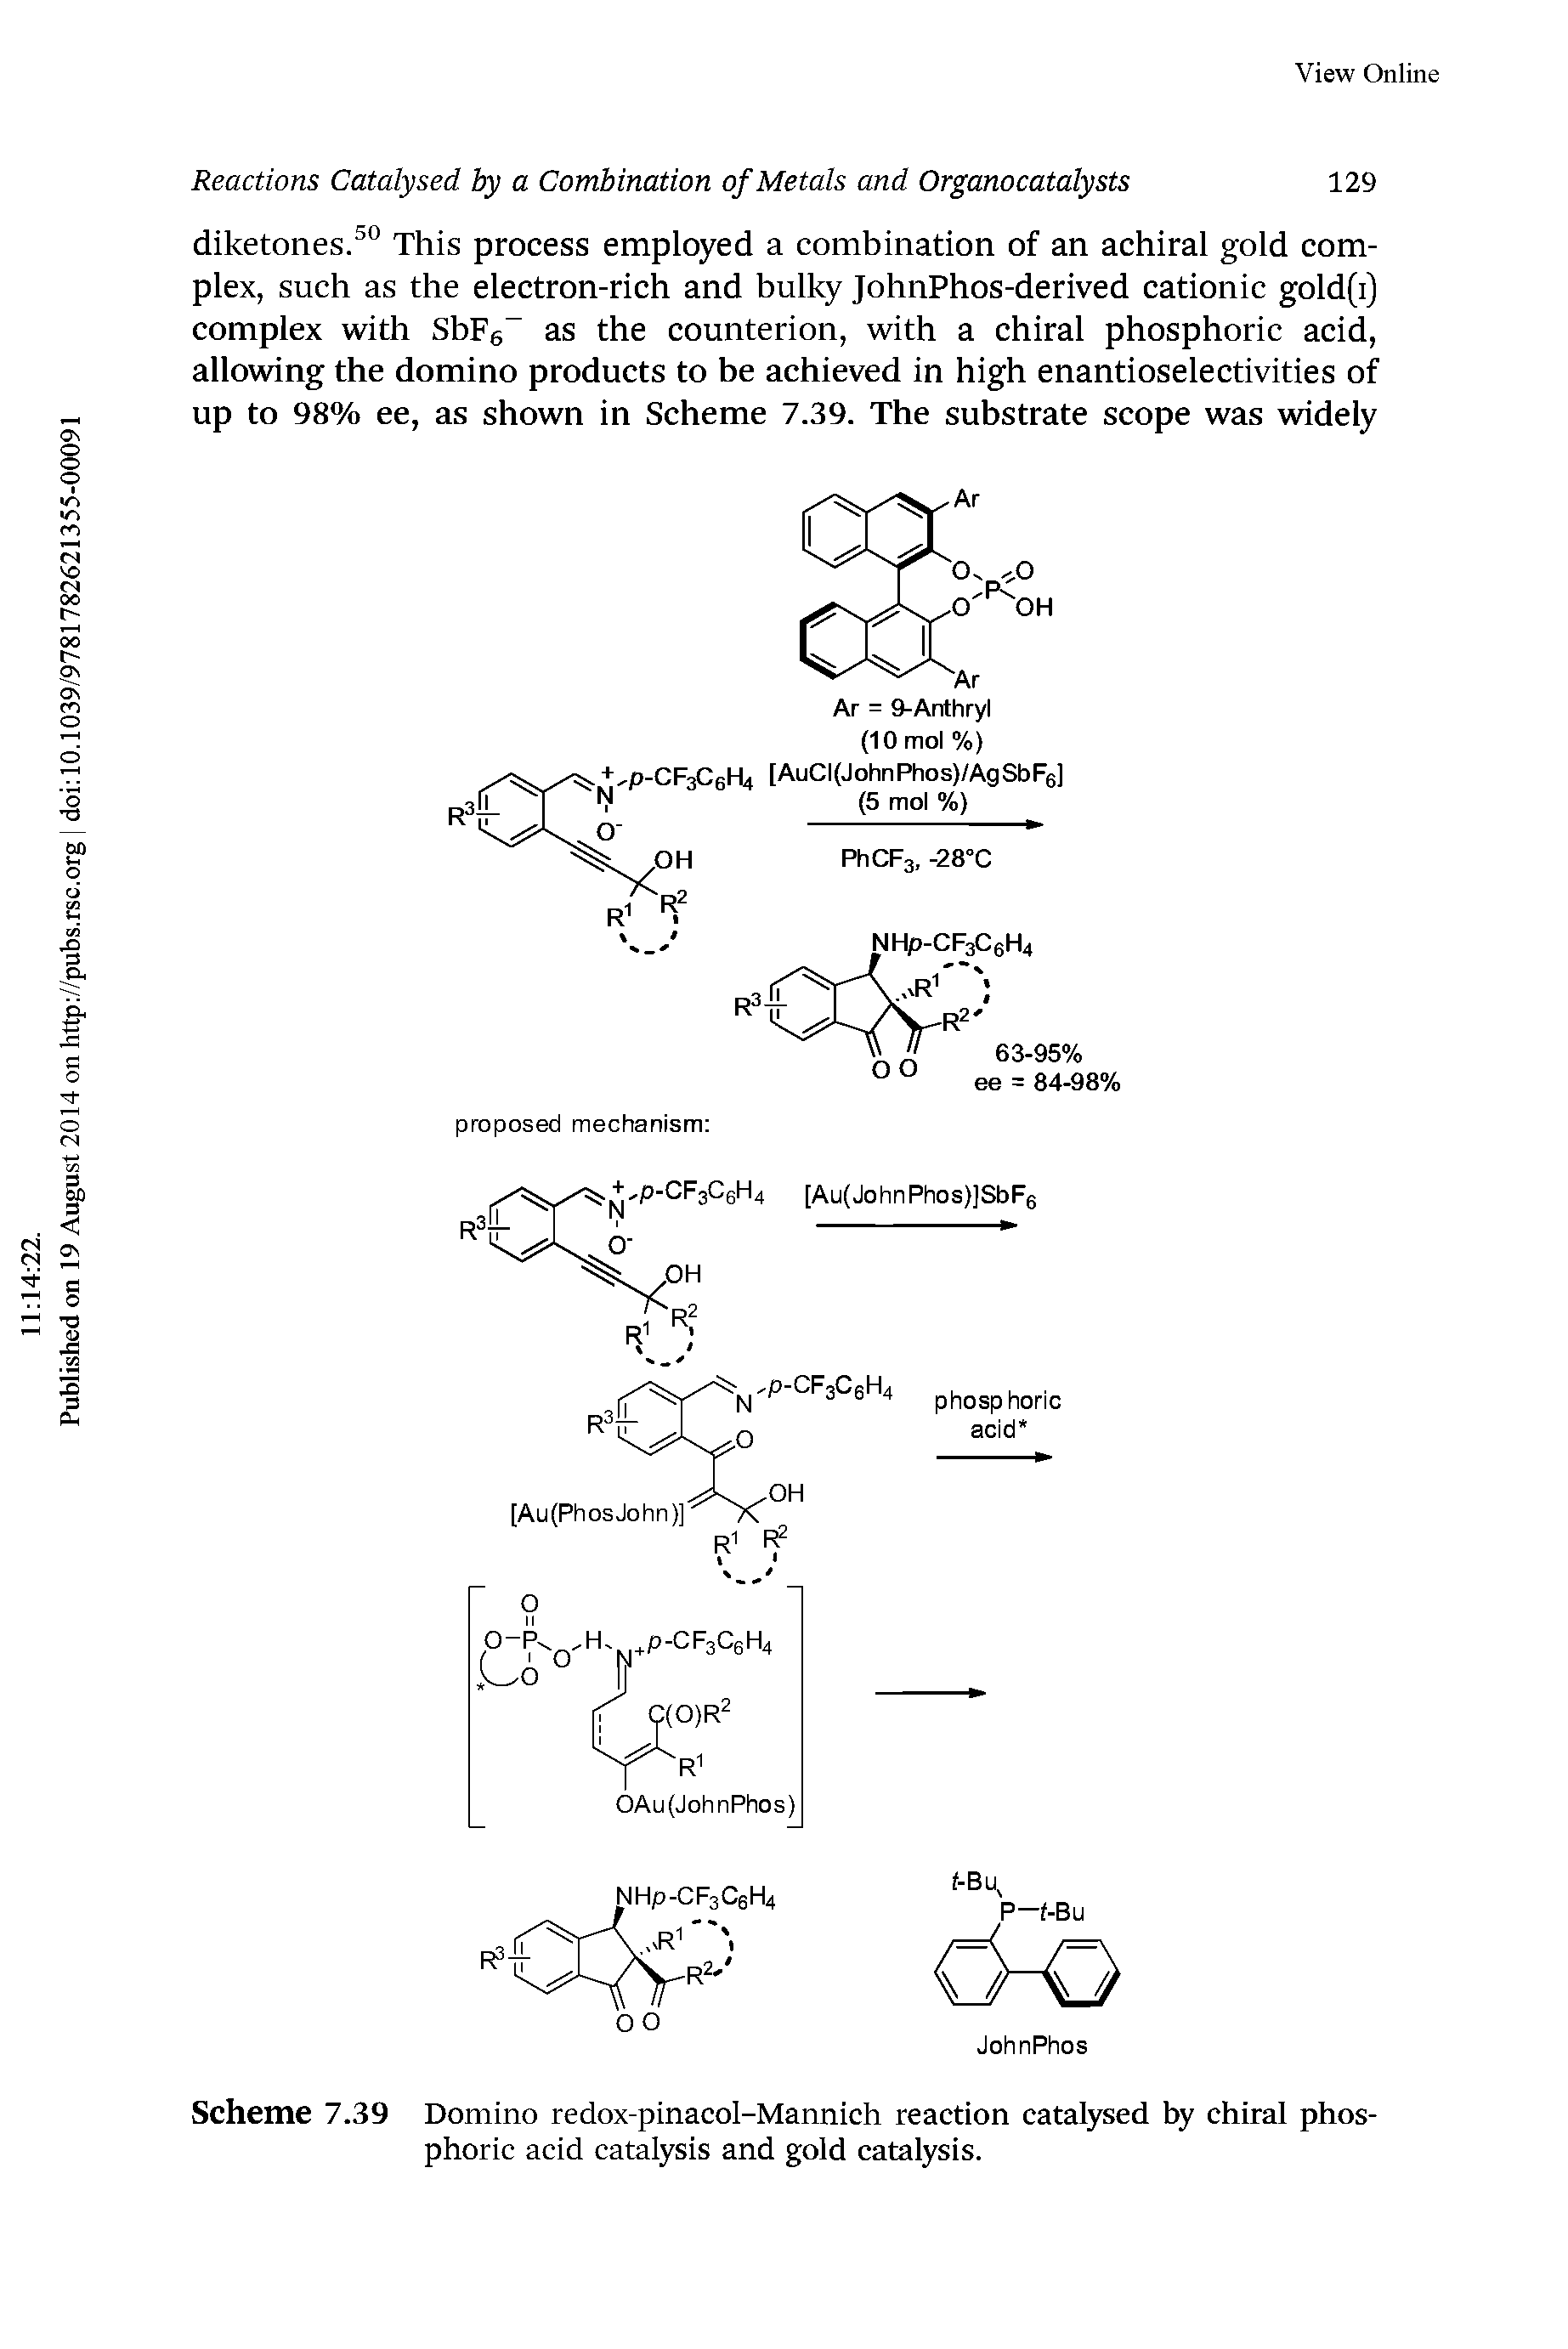 Scheme 7.39 Domino redox-pinacol-Mannich reaction catalysed by chiral phosphoric acid catalysis and gold catalysis.